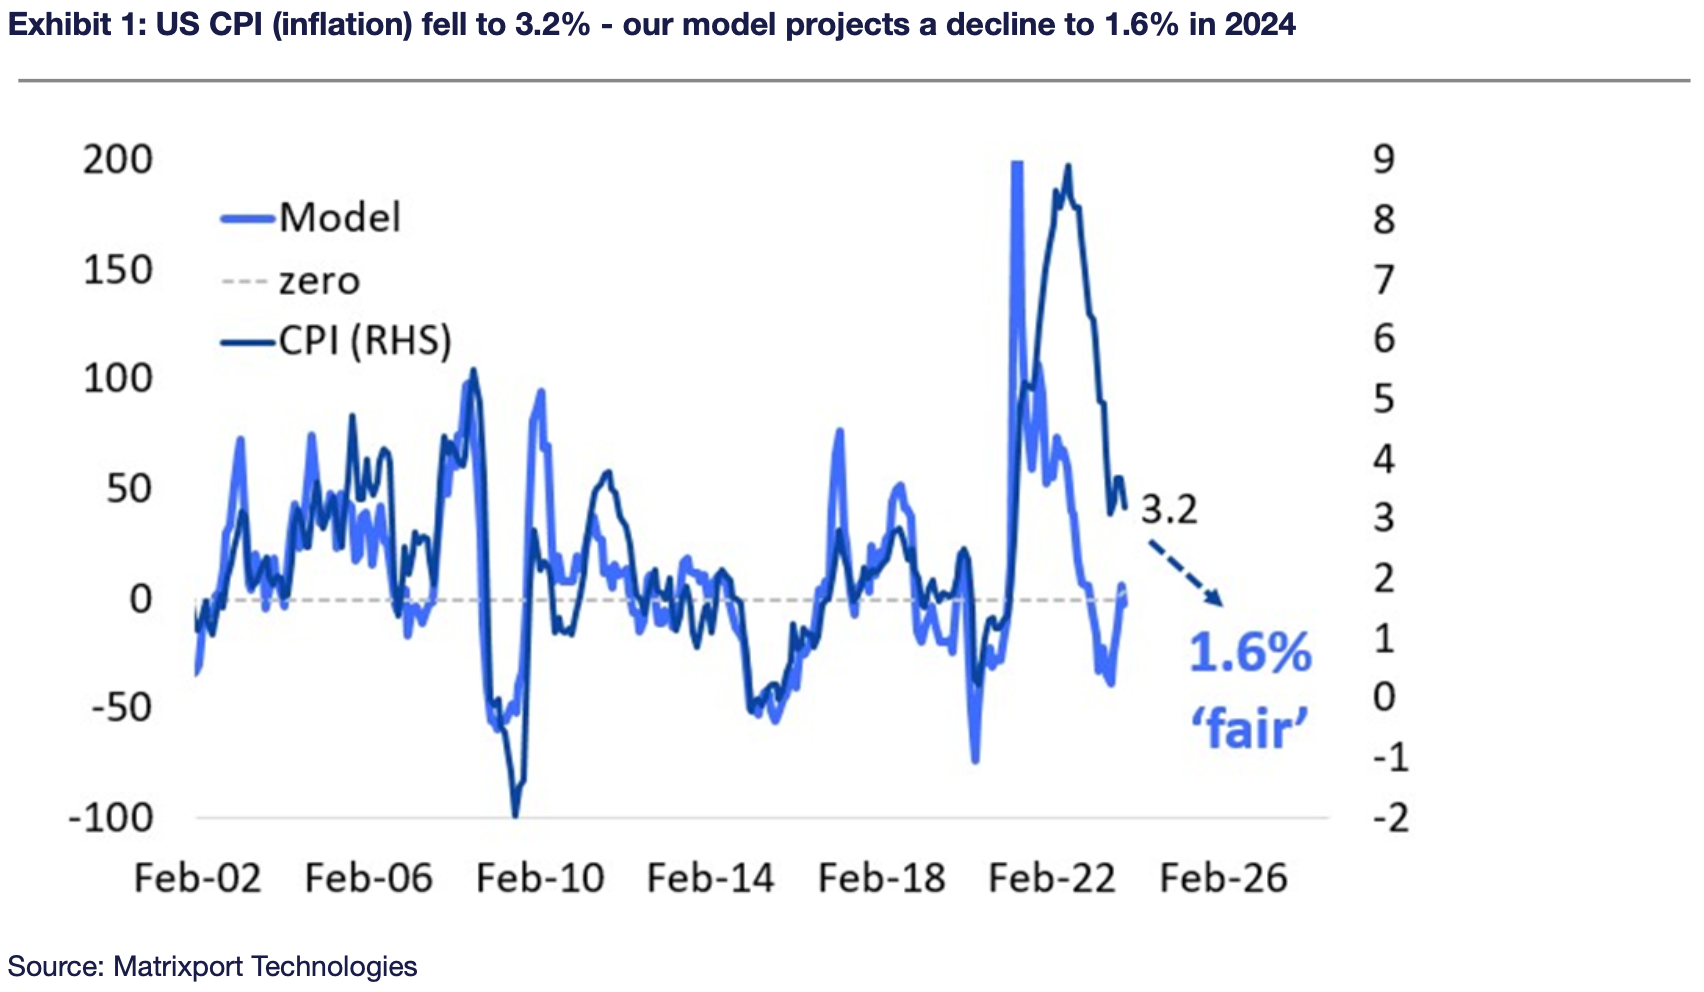 Exhibit 1: US CPI (inflation) fell to 3.2% - our model projects a decline to 1.6% in 2024